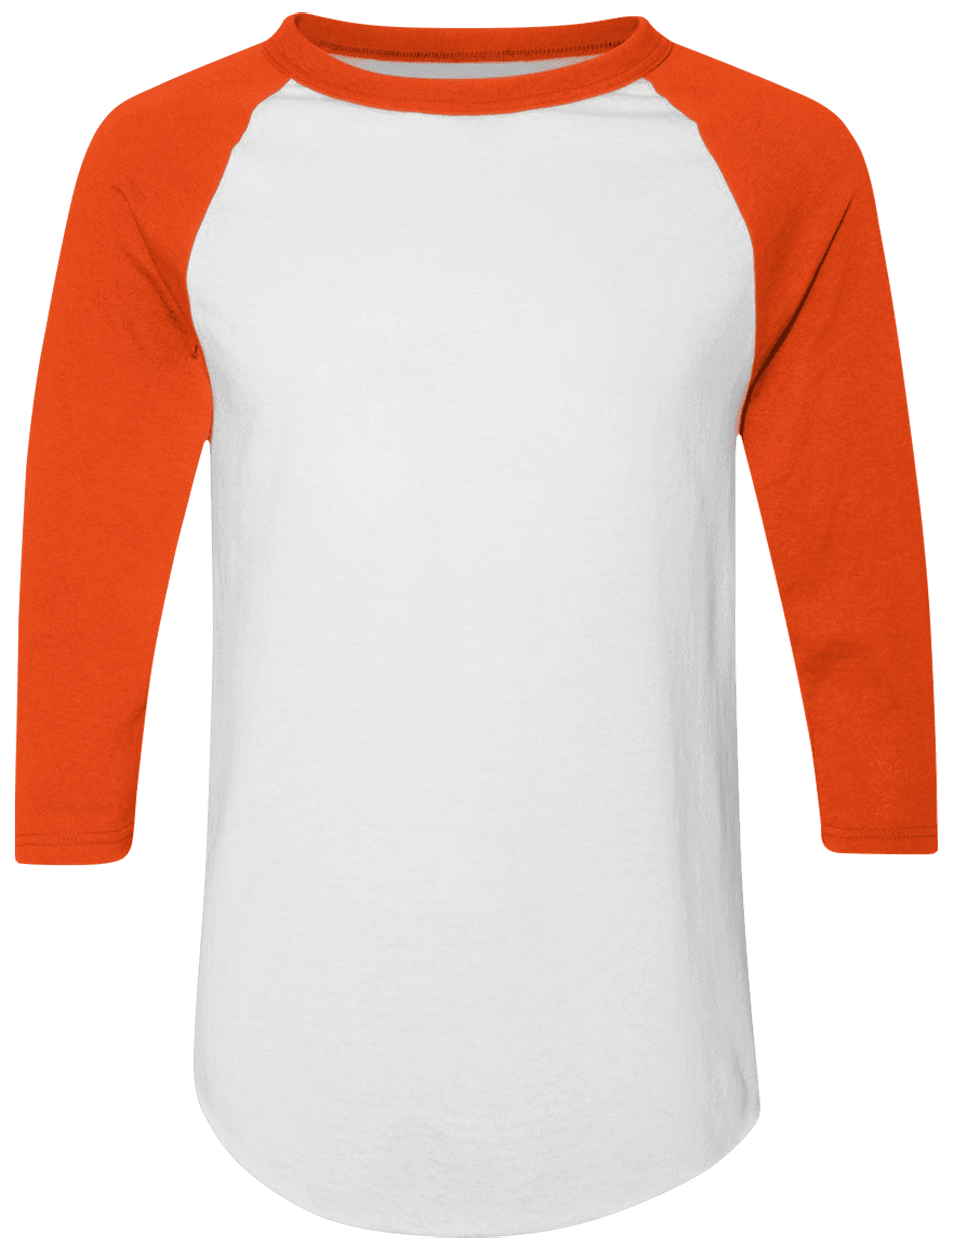 Standing Collar Raglan Jersey - Free Download Images High Quality